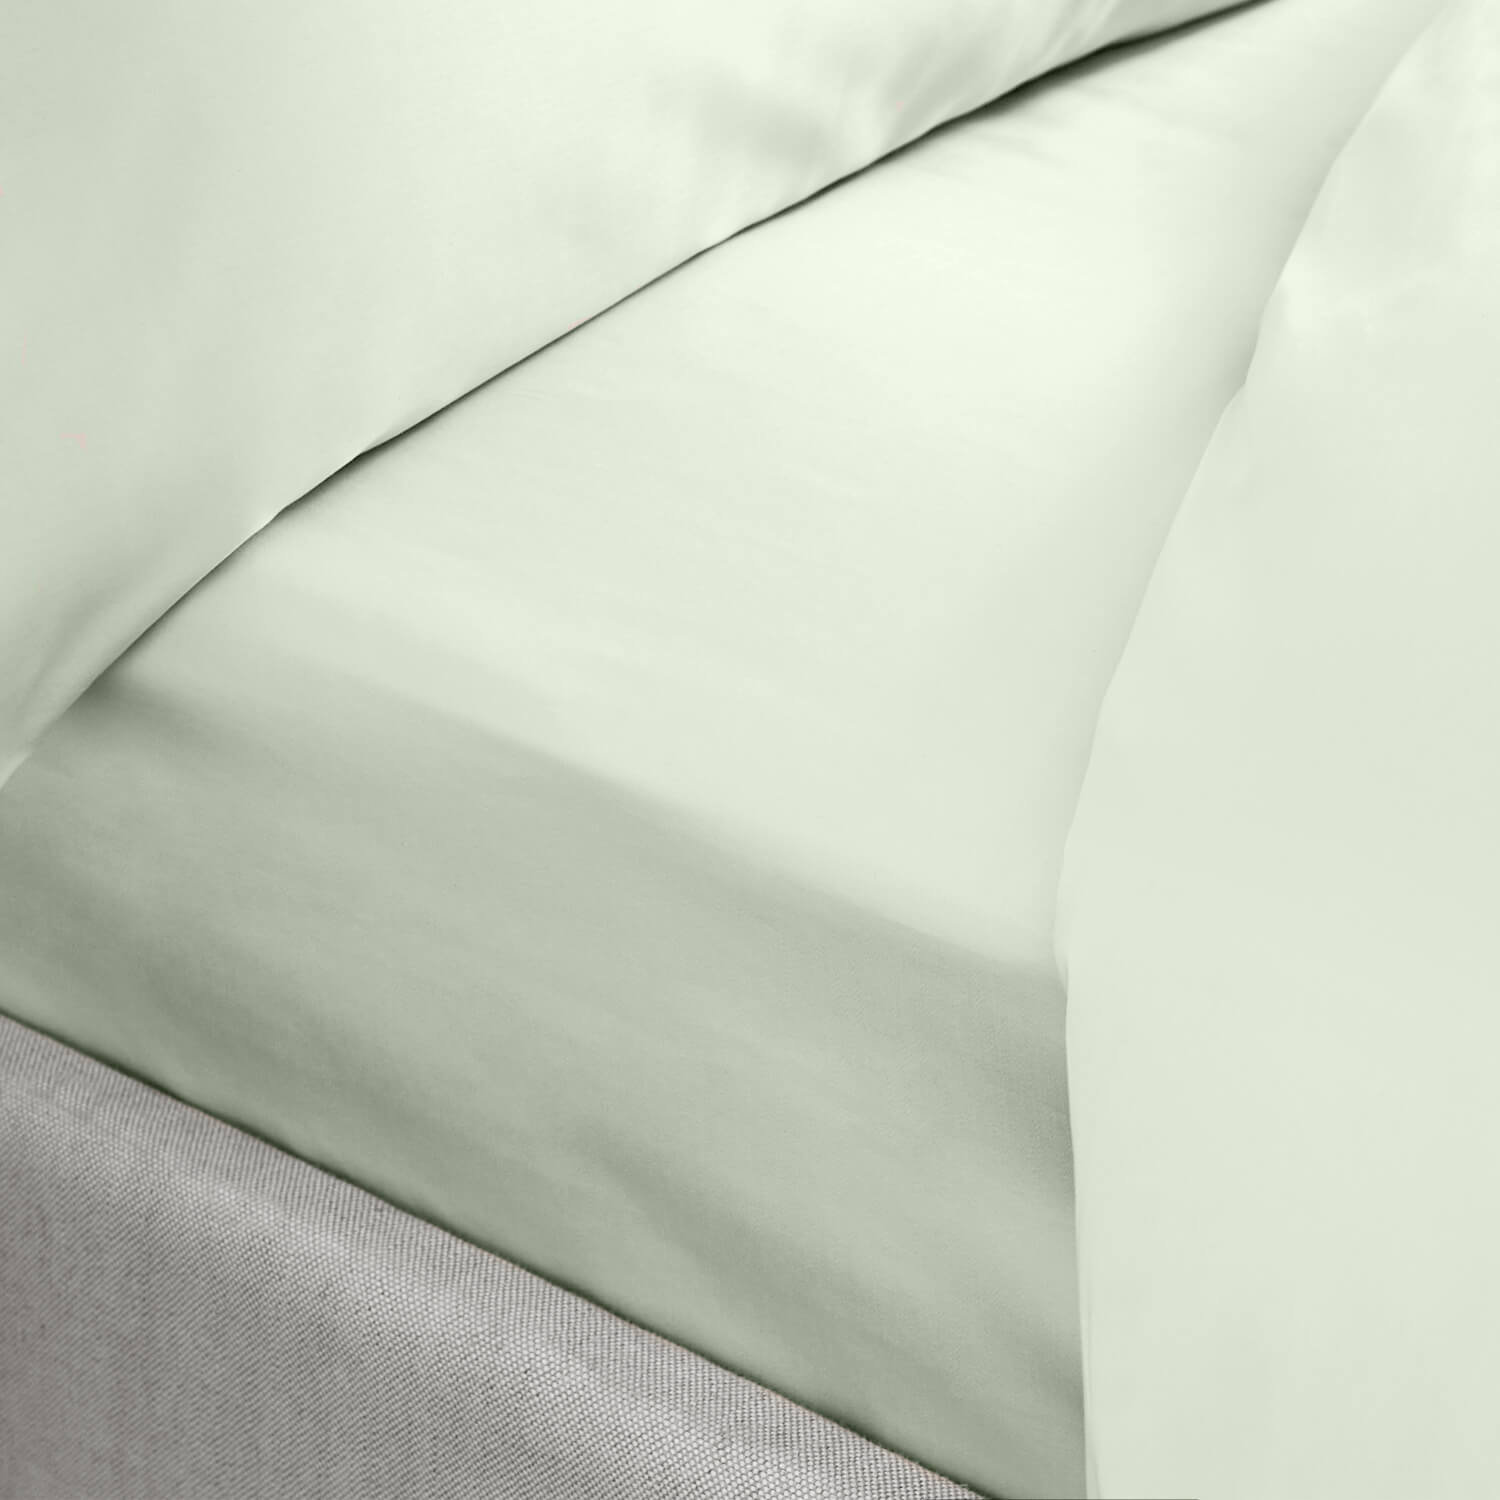 Bianca 100% Cotton 400 Thread Count Sateen Fitted Sheet - Green 1 Shaws Department Stores